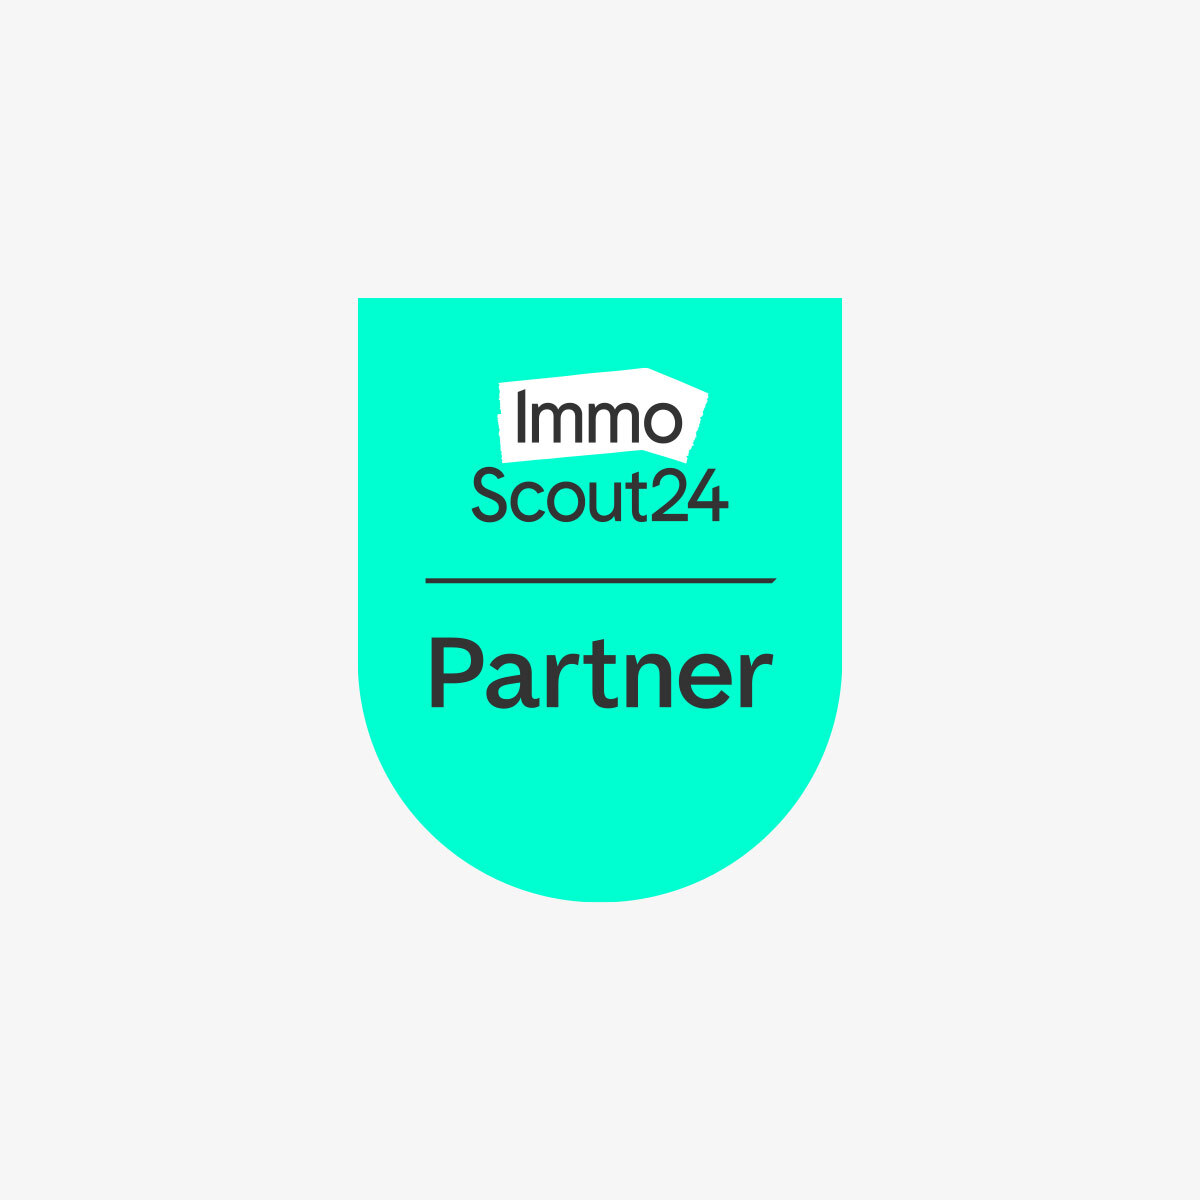 Partner von Immoscout24 , Immoscout, Immobilienscout24, Immoscoutpartner, Immobilien verkaufen mit Immobilienscout, exklusiver Partner von Immobilienscout